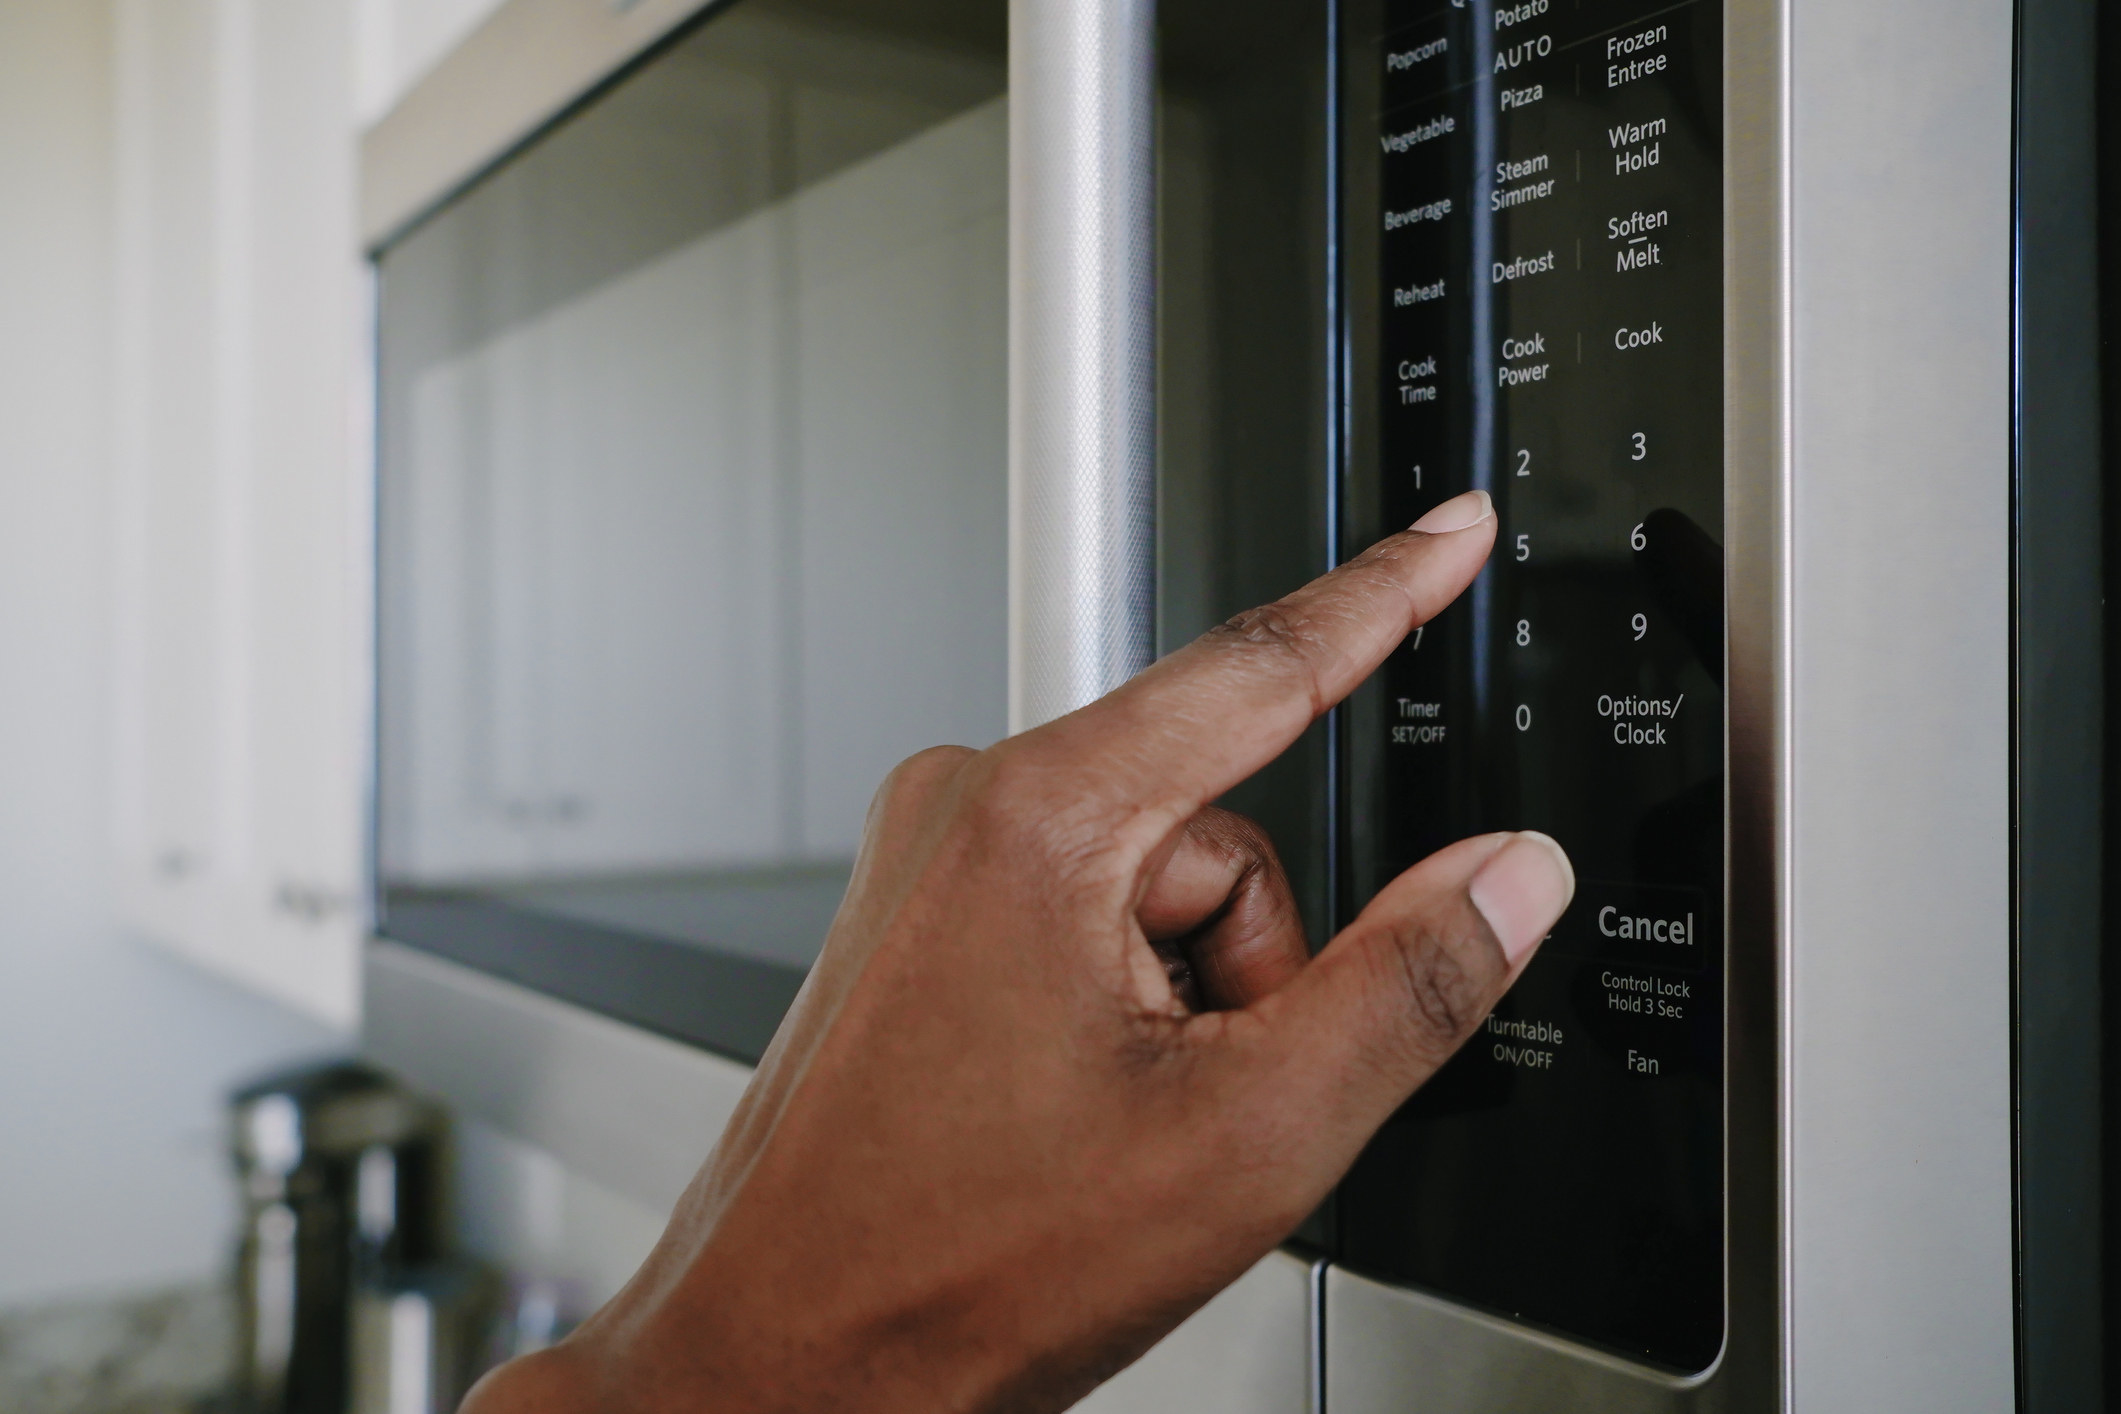 A hand touching buttons on the microwave.